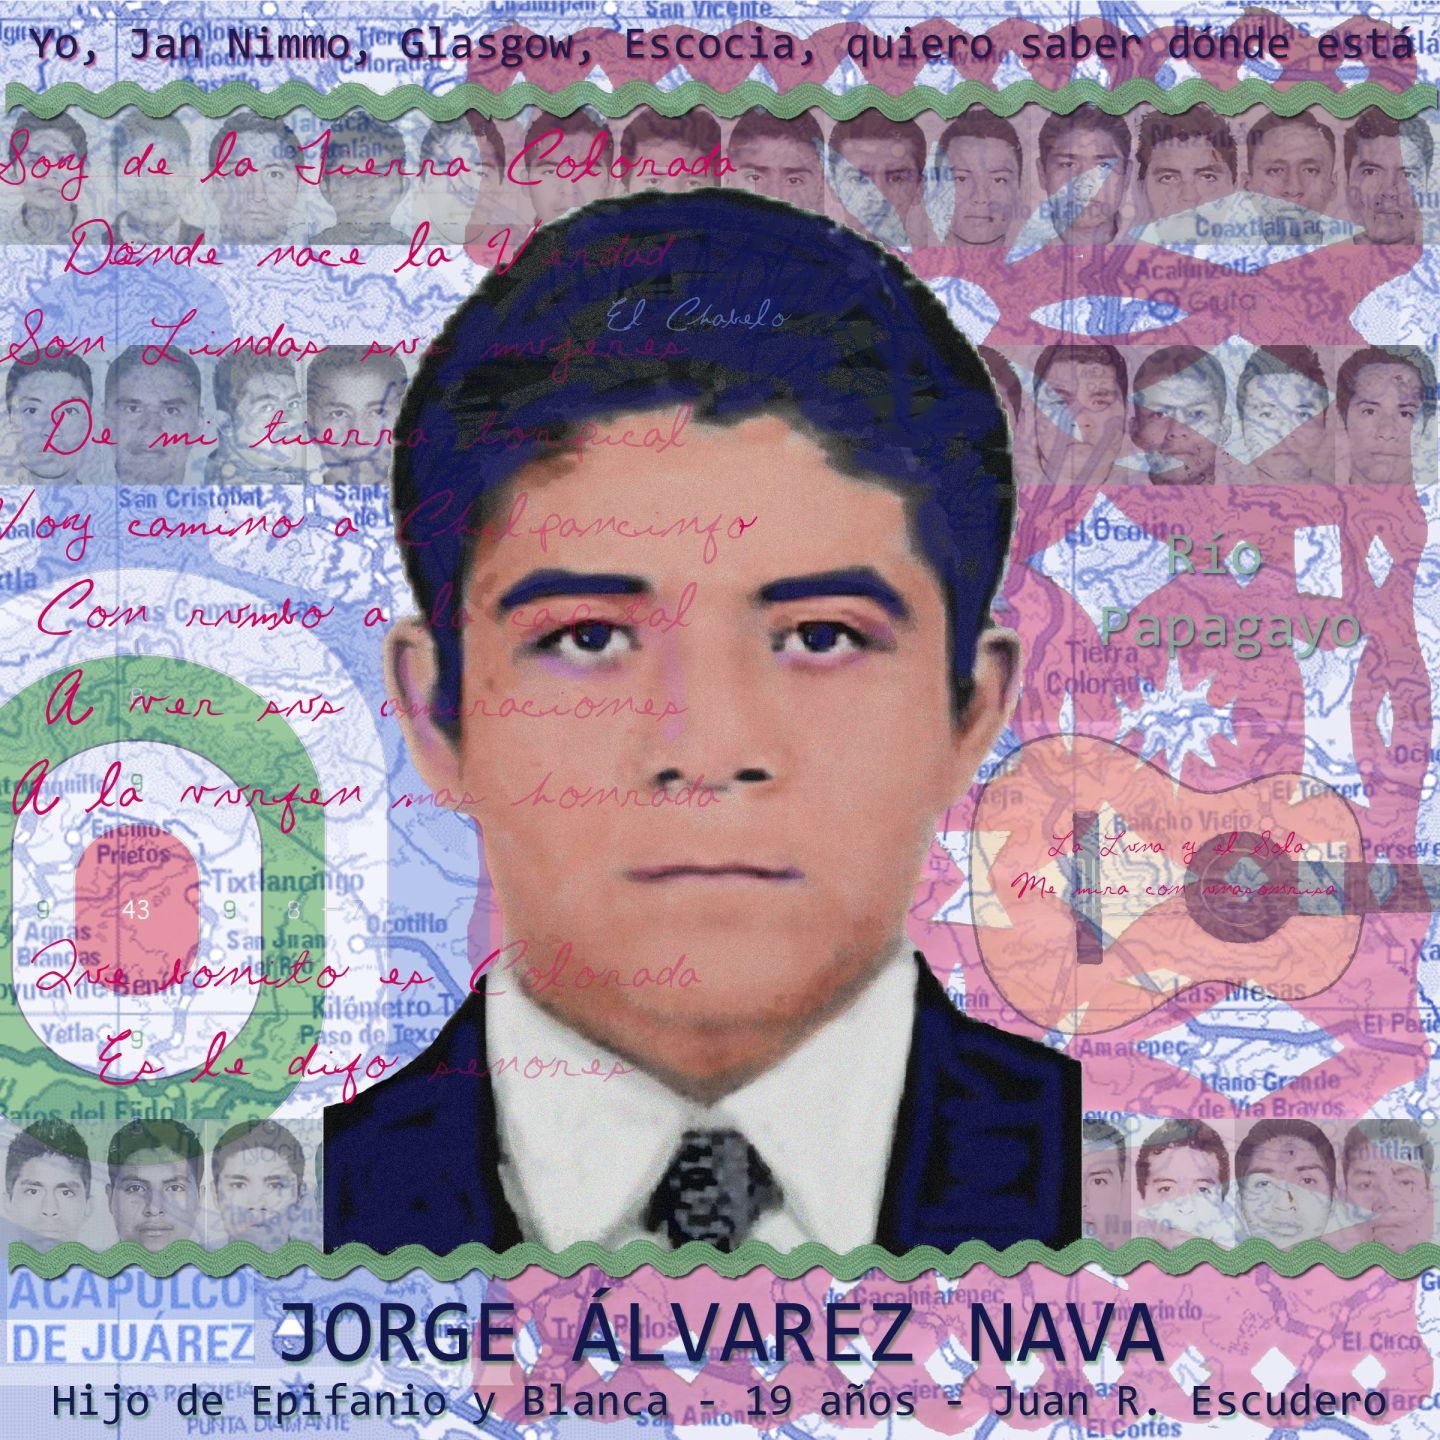 A tribute to Mexico's disappeared amidst demands for the truth 30